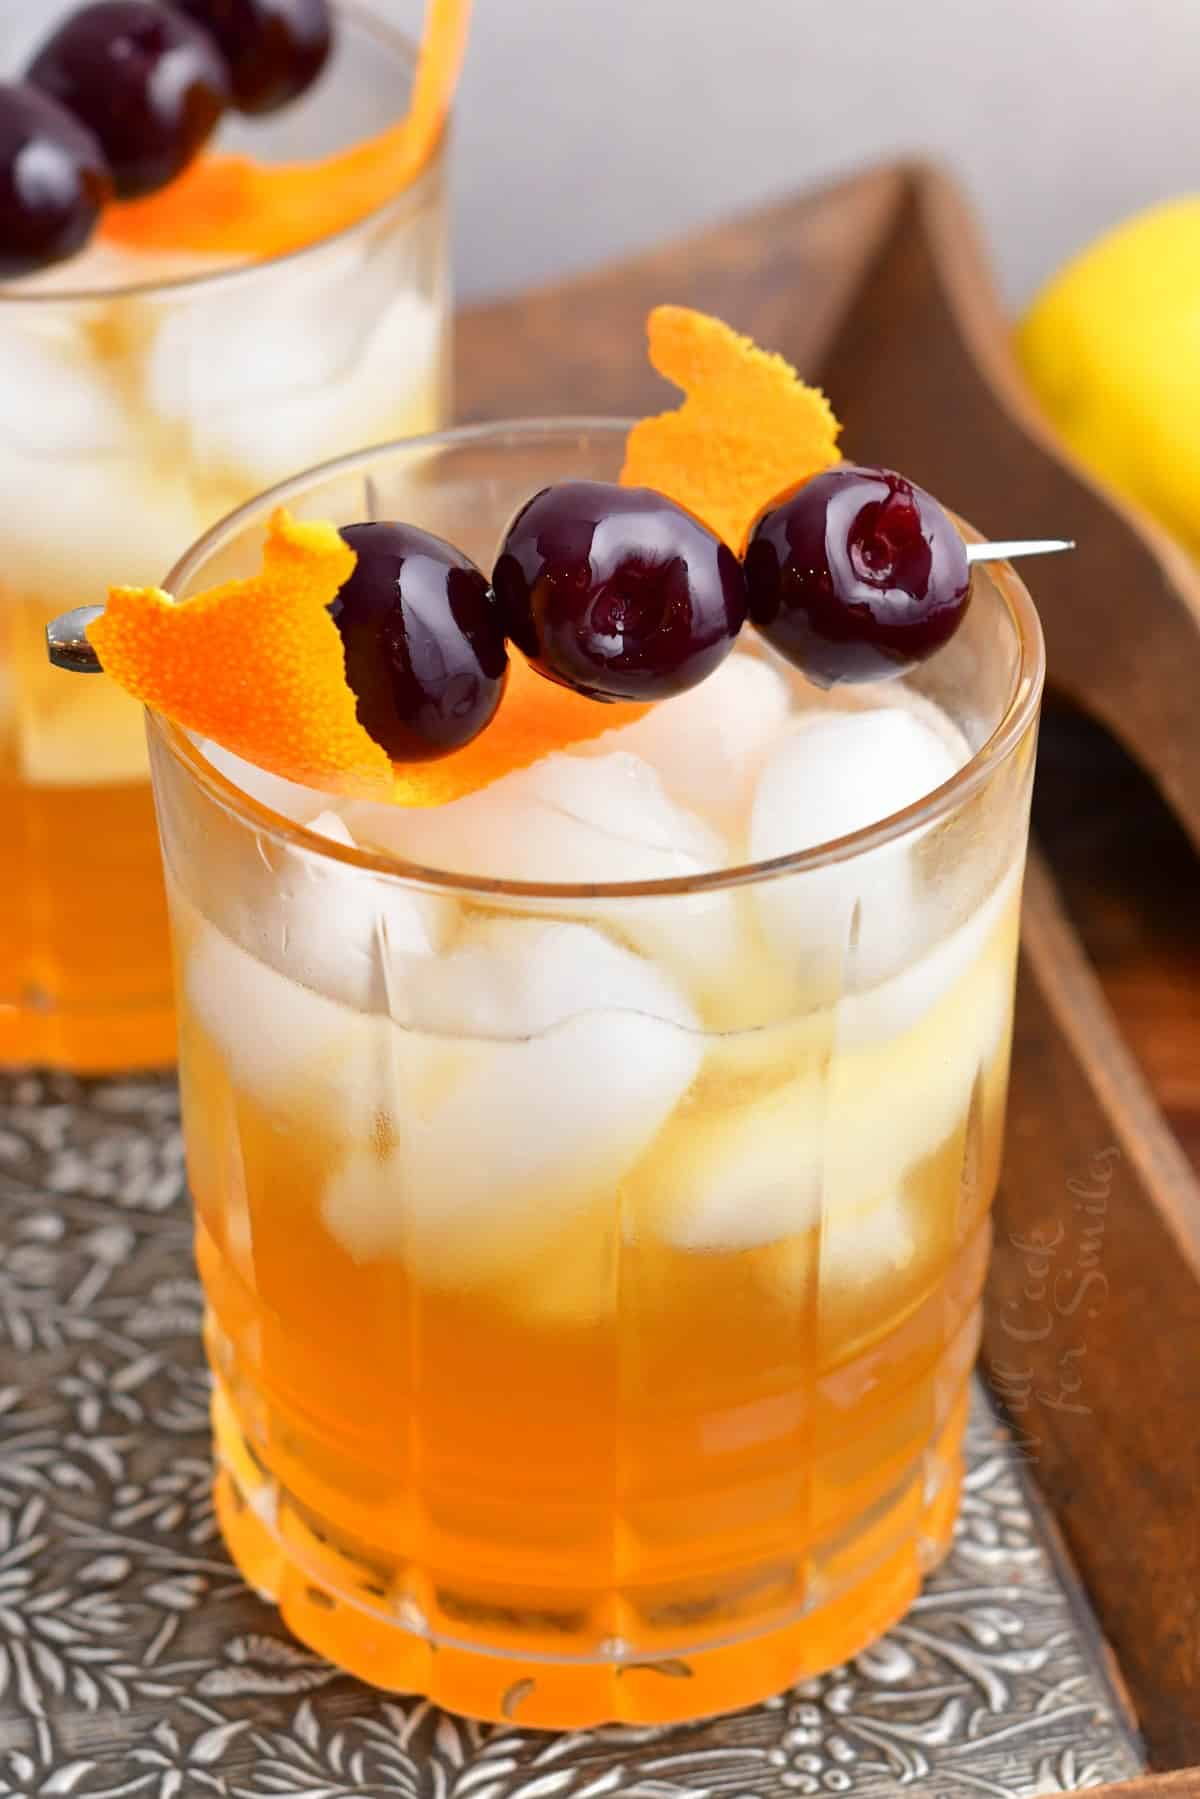 Amaretto Sour - A Classic Amaretto Cocktail That's Not Too Sour or Sweet